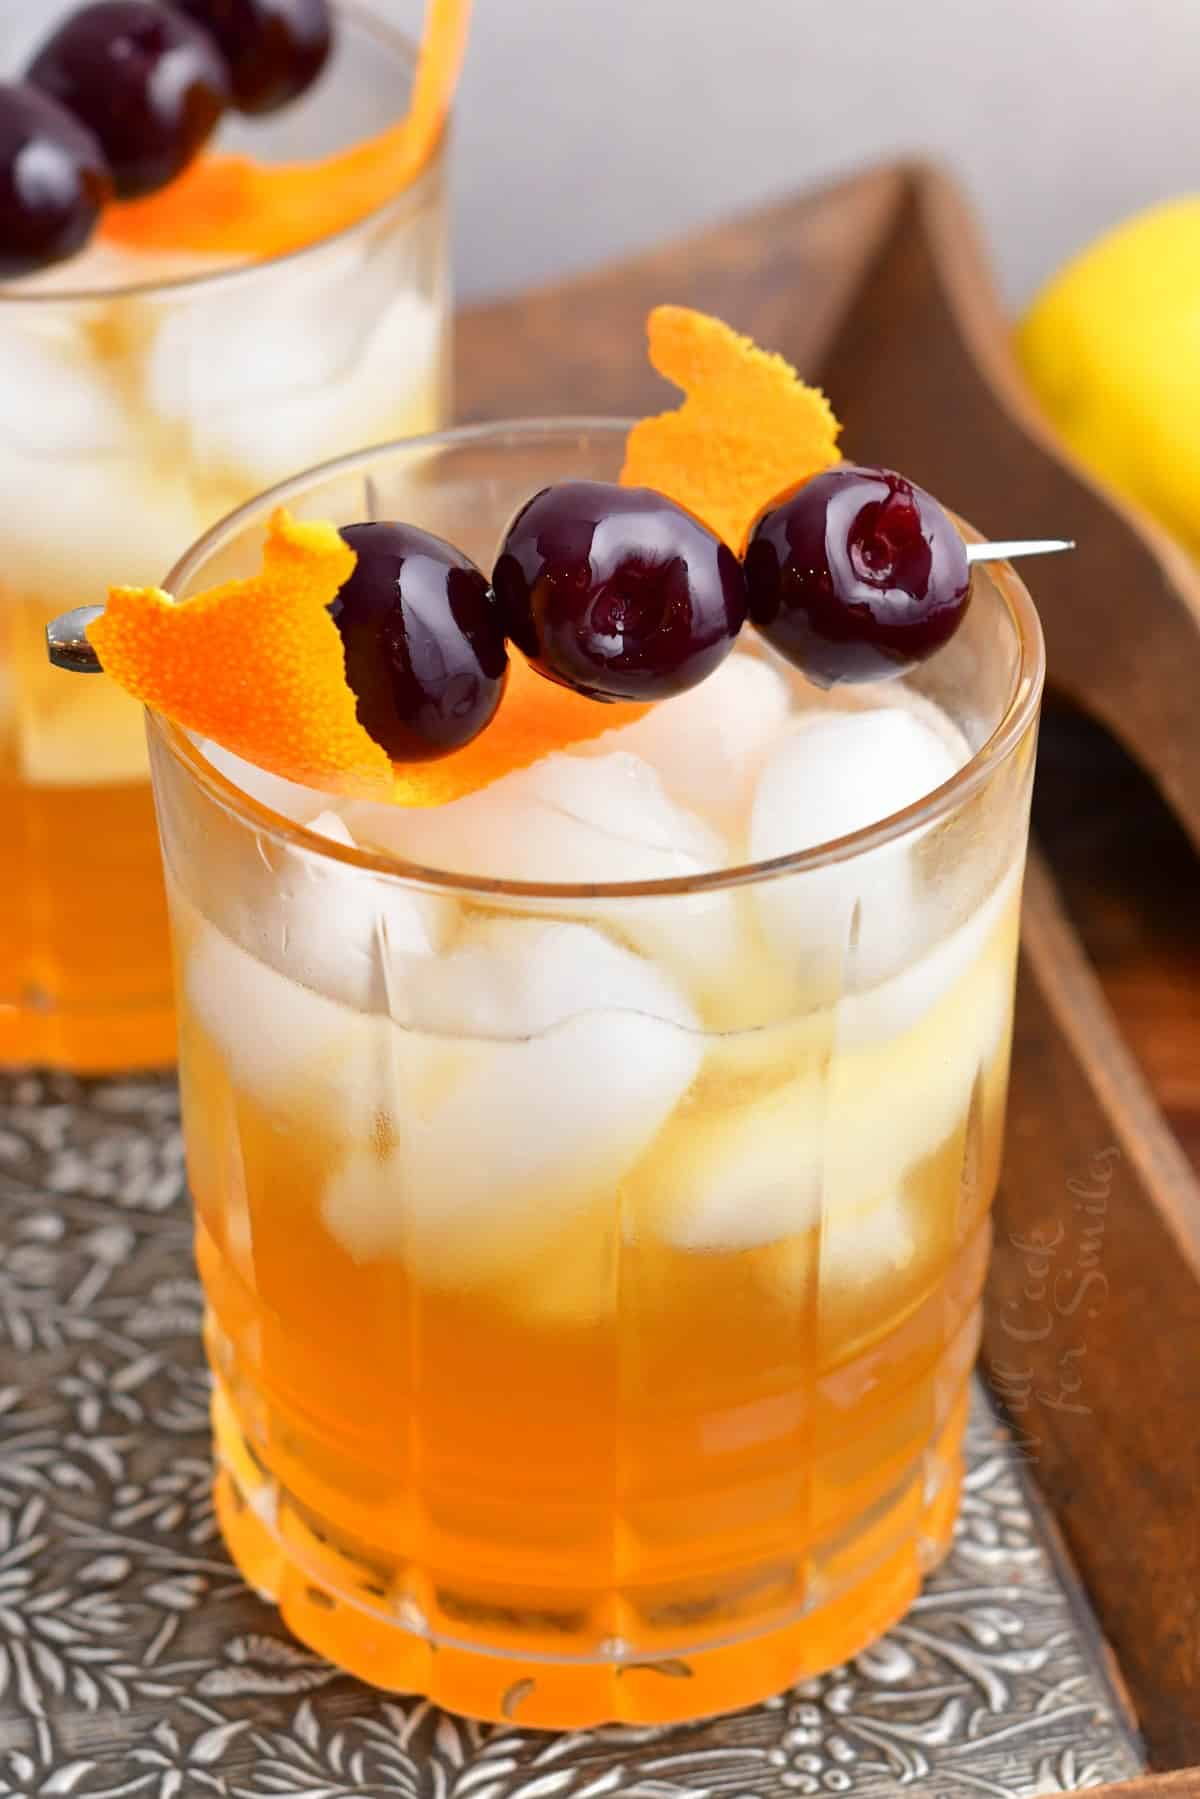 Amaretto Sour - A Classic Amaretto Cocktail That's Not Too Sour or Sweet